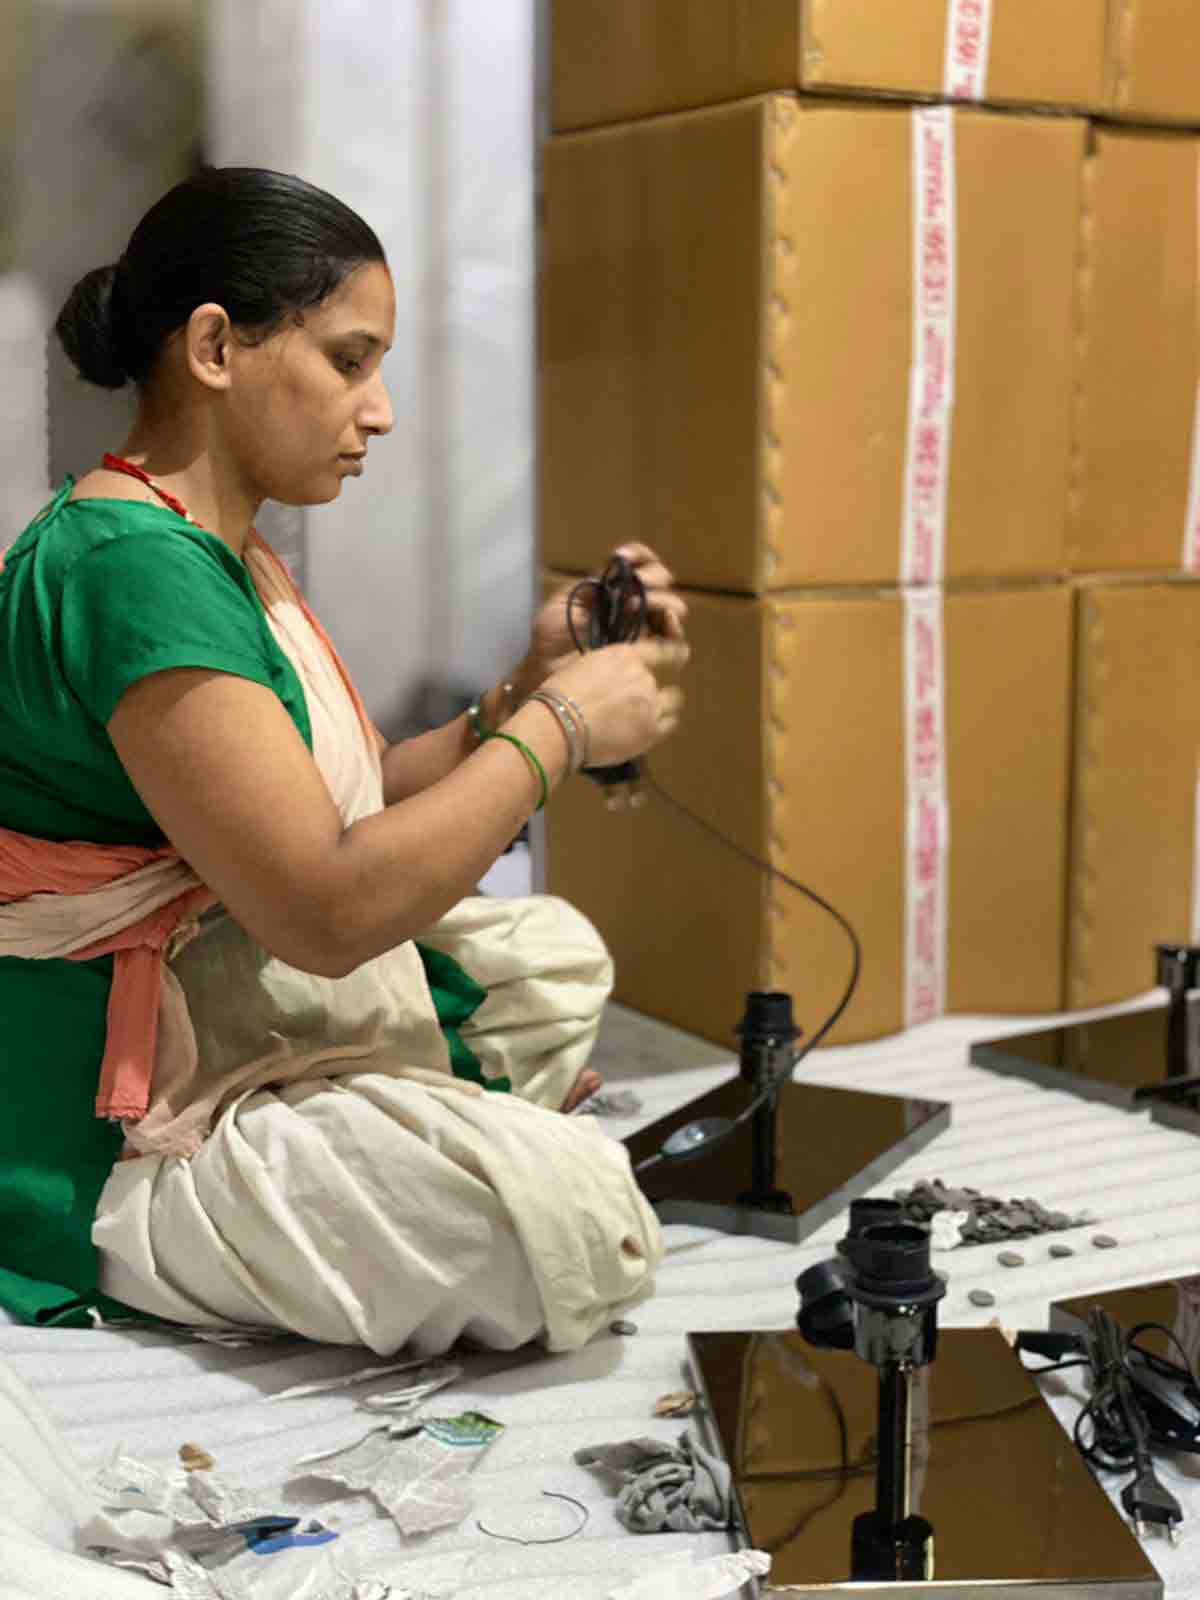 a woman working on decorative light